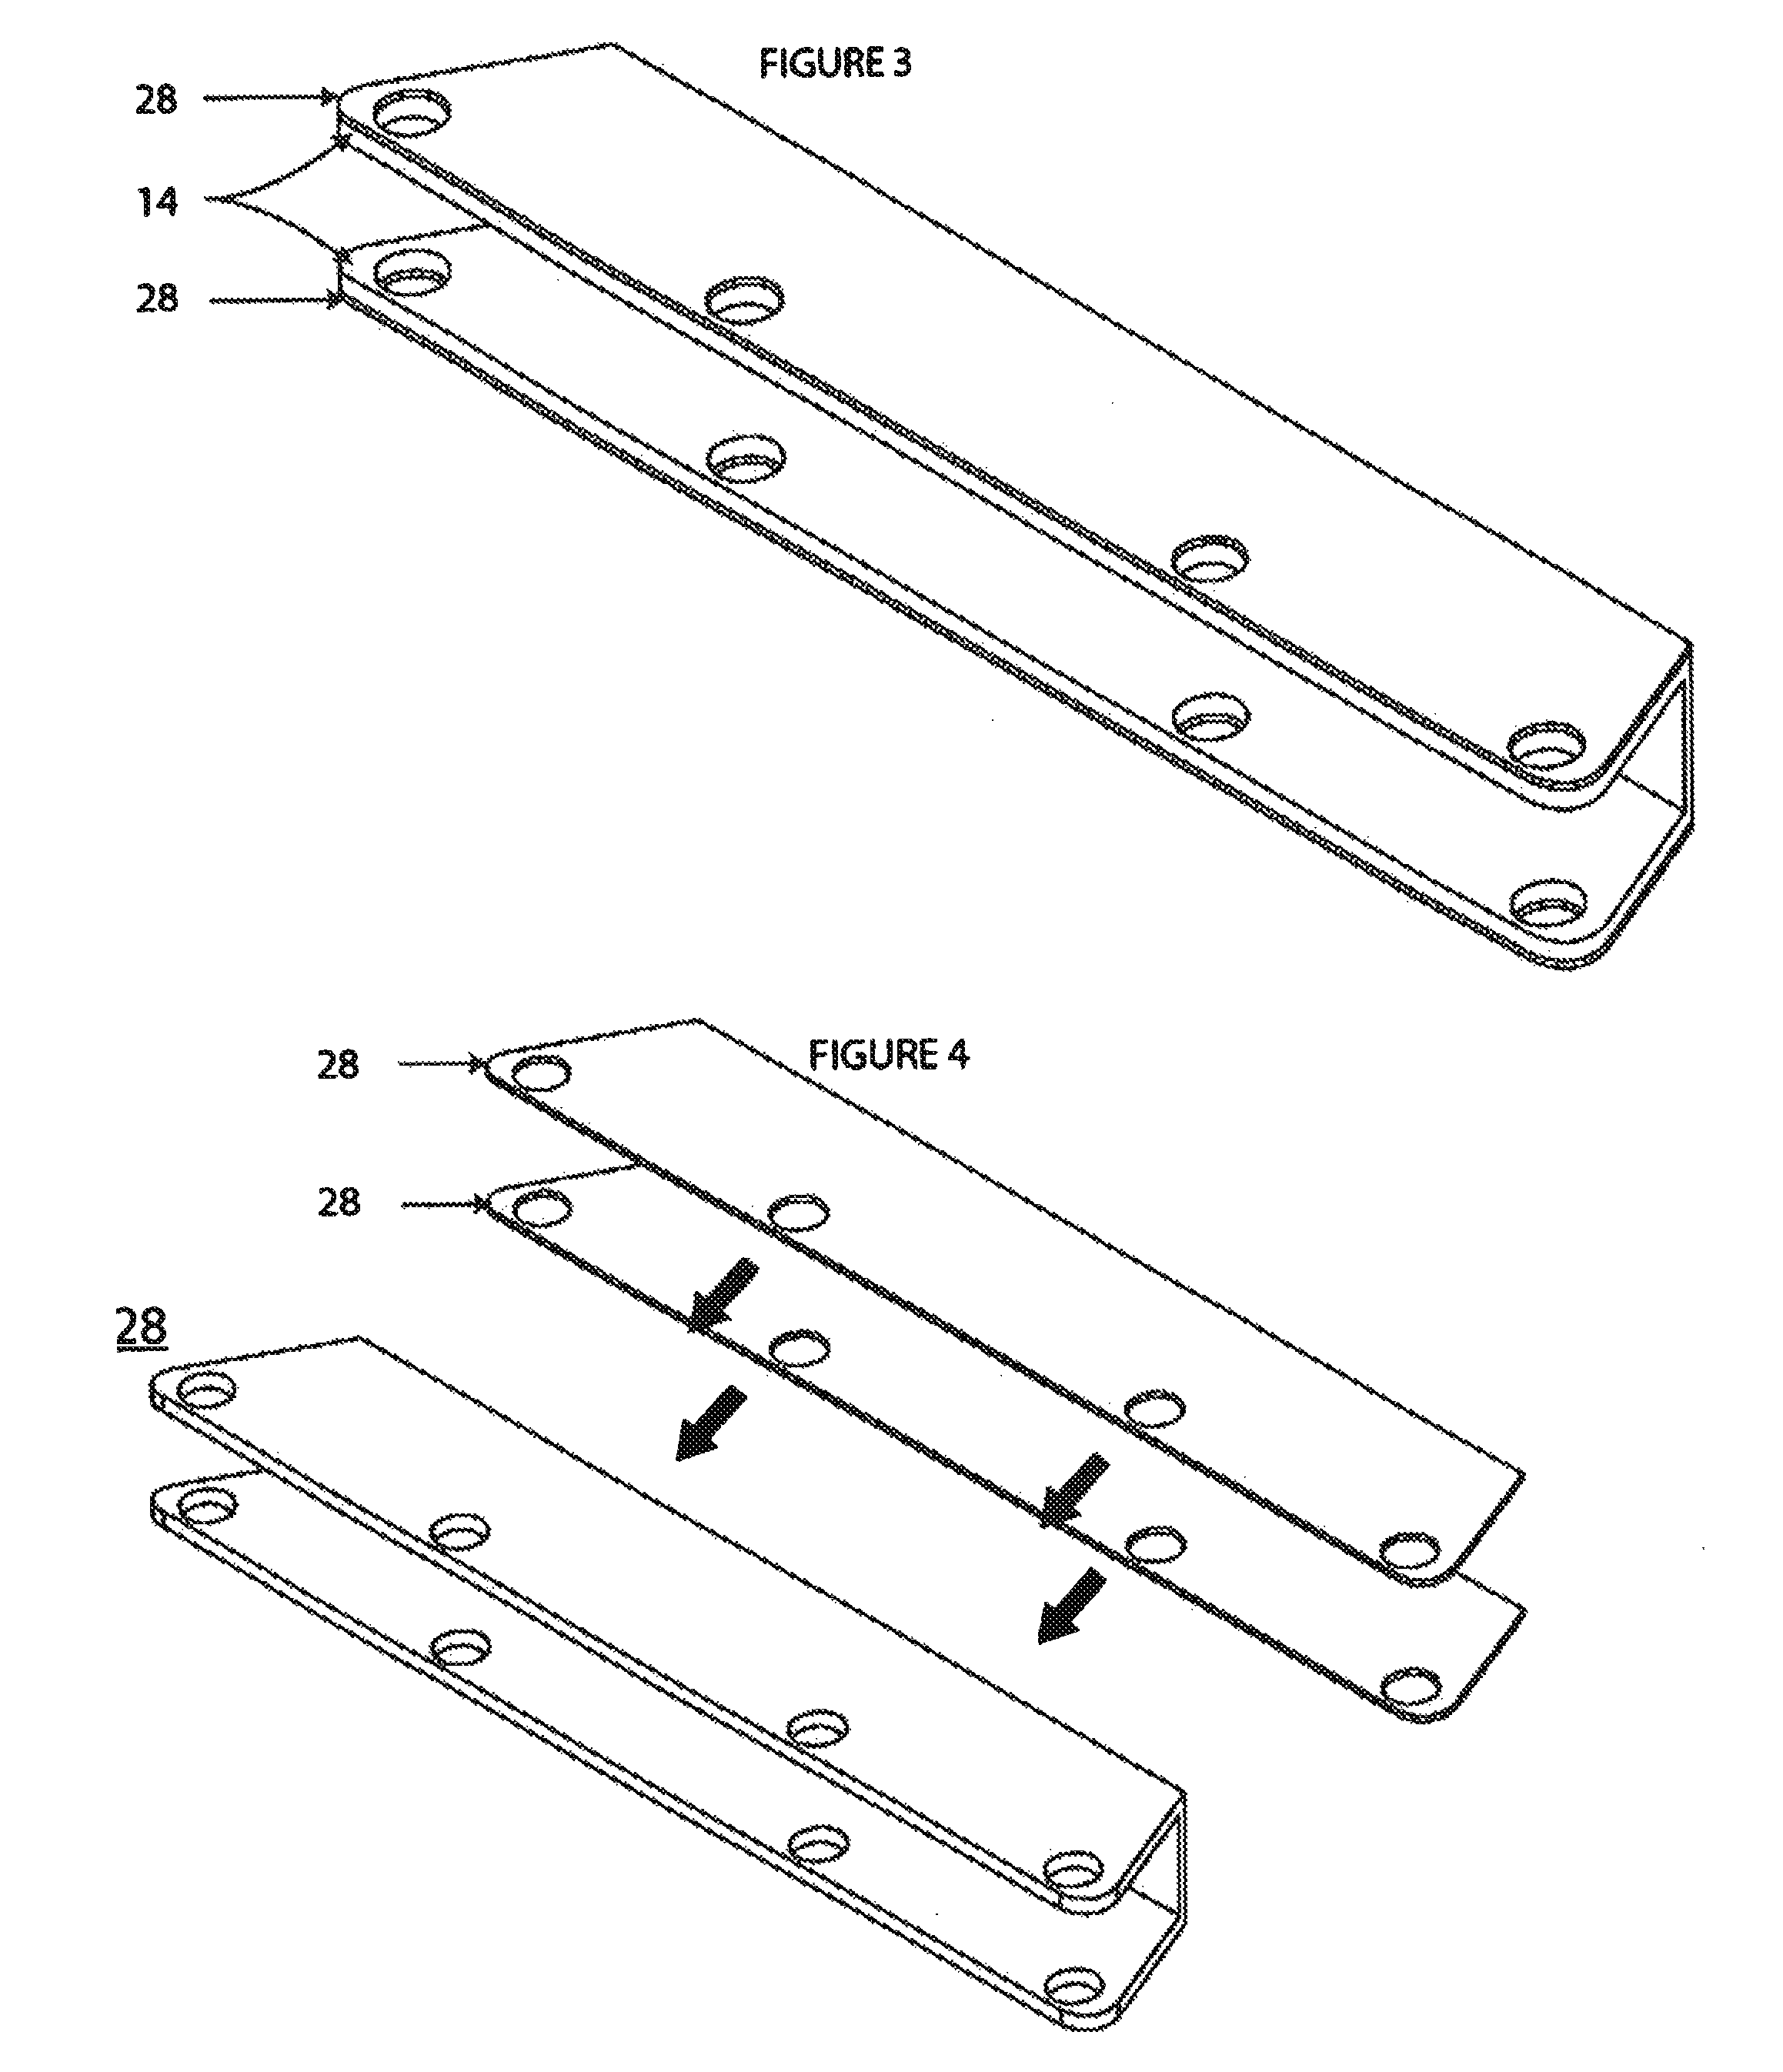 Interchangeable graphic display system and method of making same